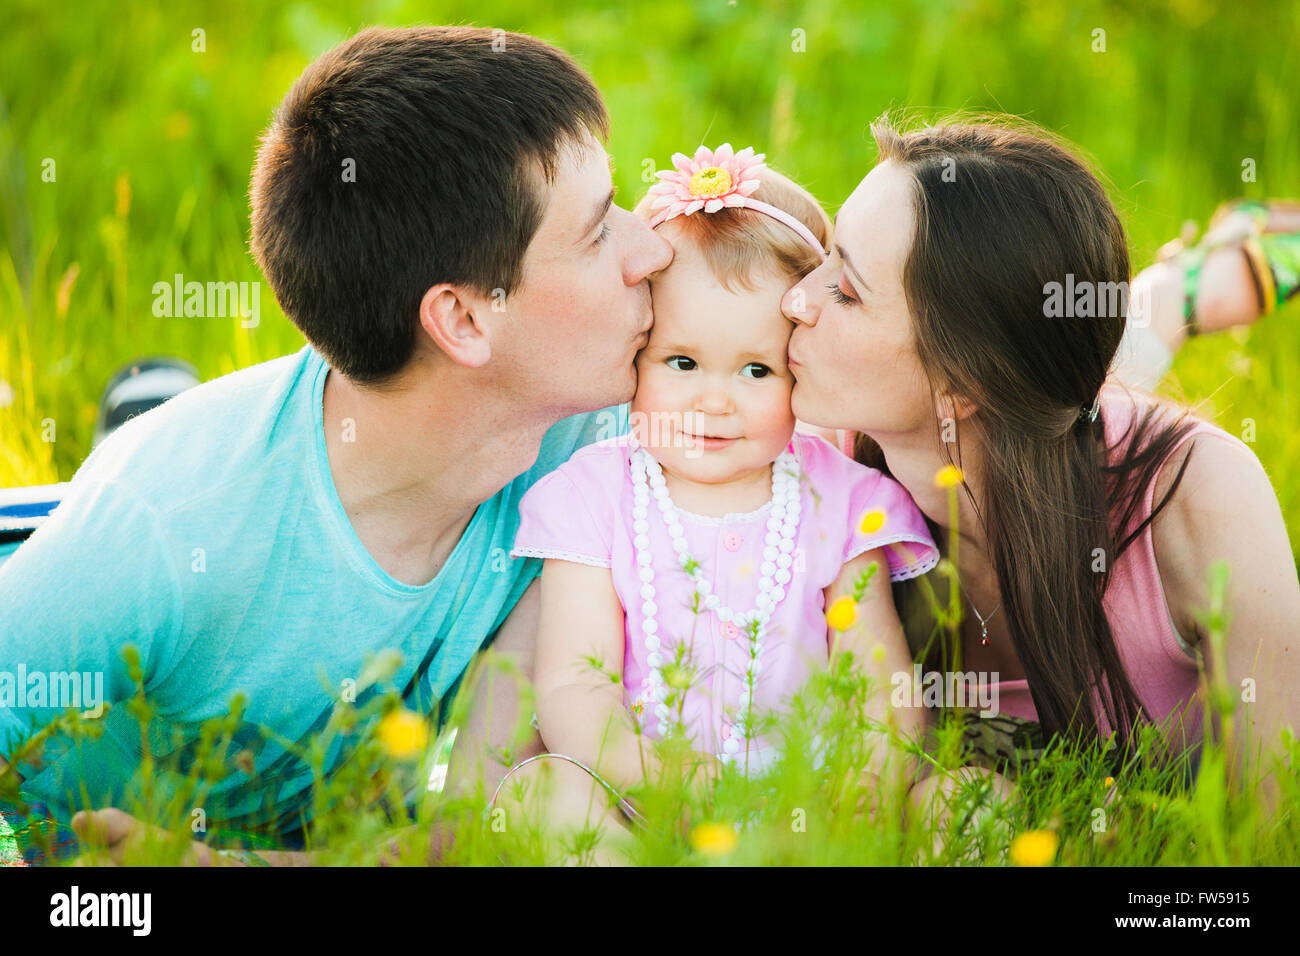 Mom and dad kissing cheeks of little daughter. Family portrait. Stock Photo